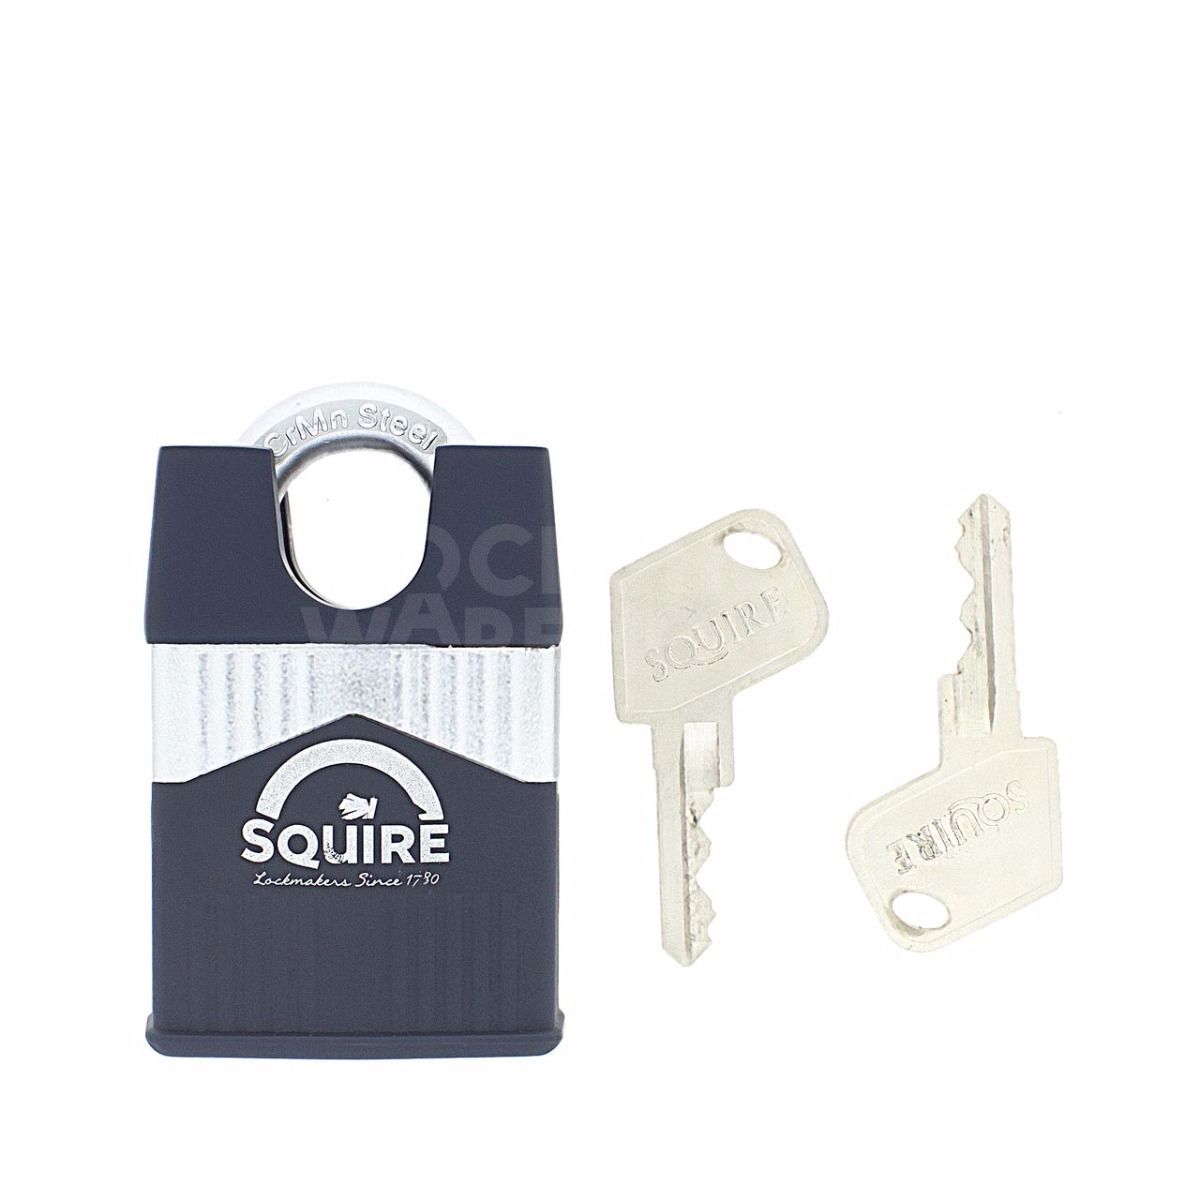 Dimensions Image: SQUIRE Warrior WAR45 Closed Shackle Padlock